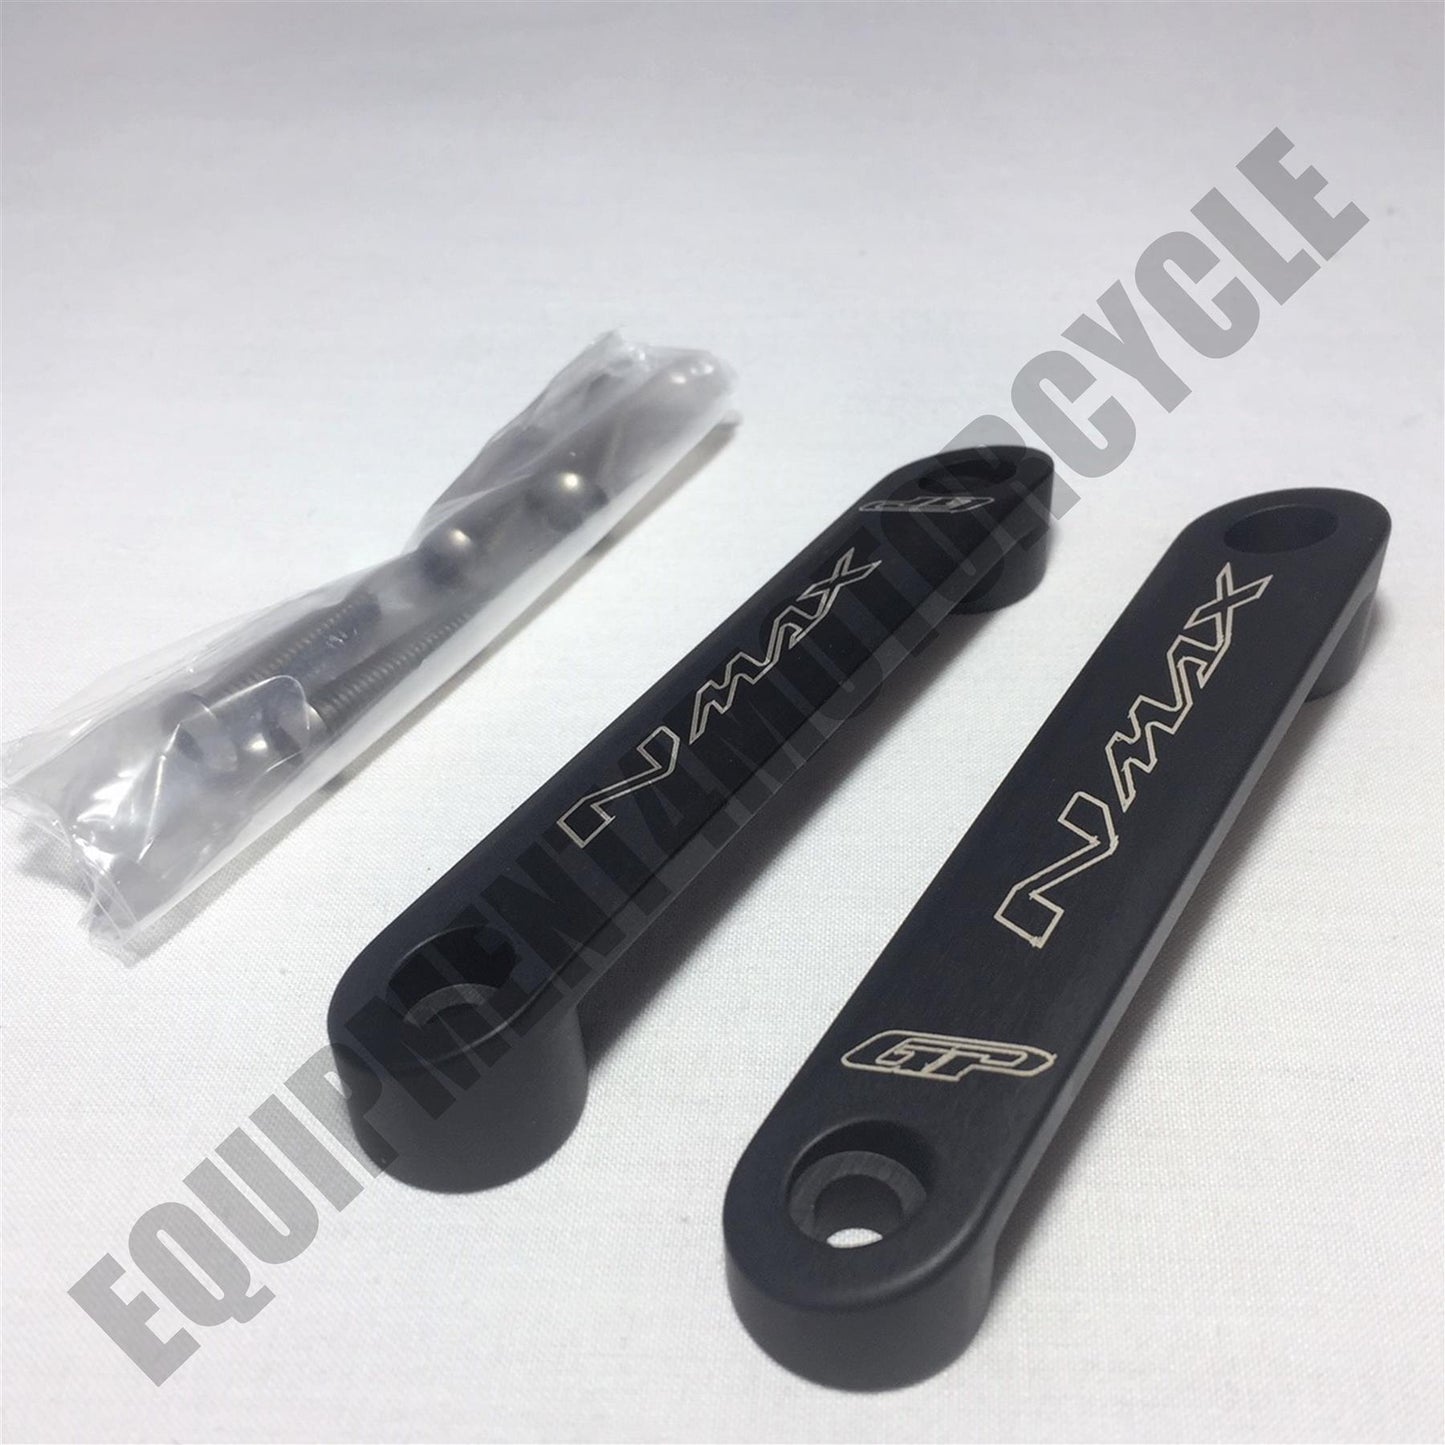 Yamaha Nmax front fender accessories metal strip 15-20